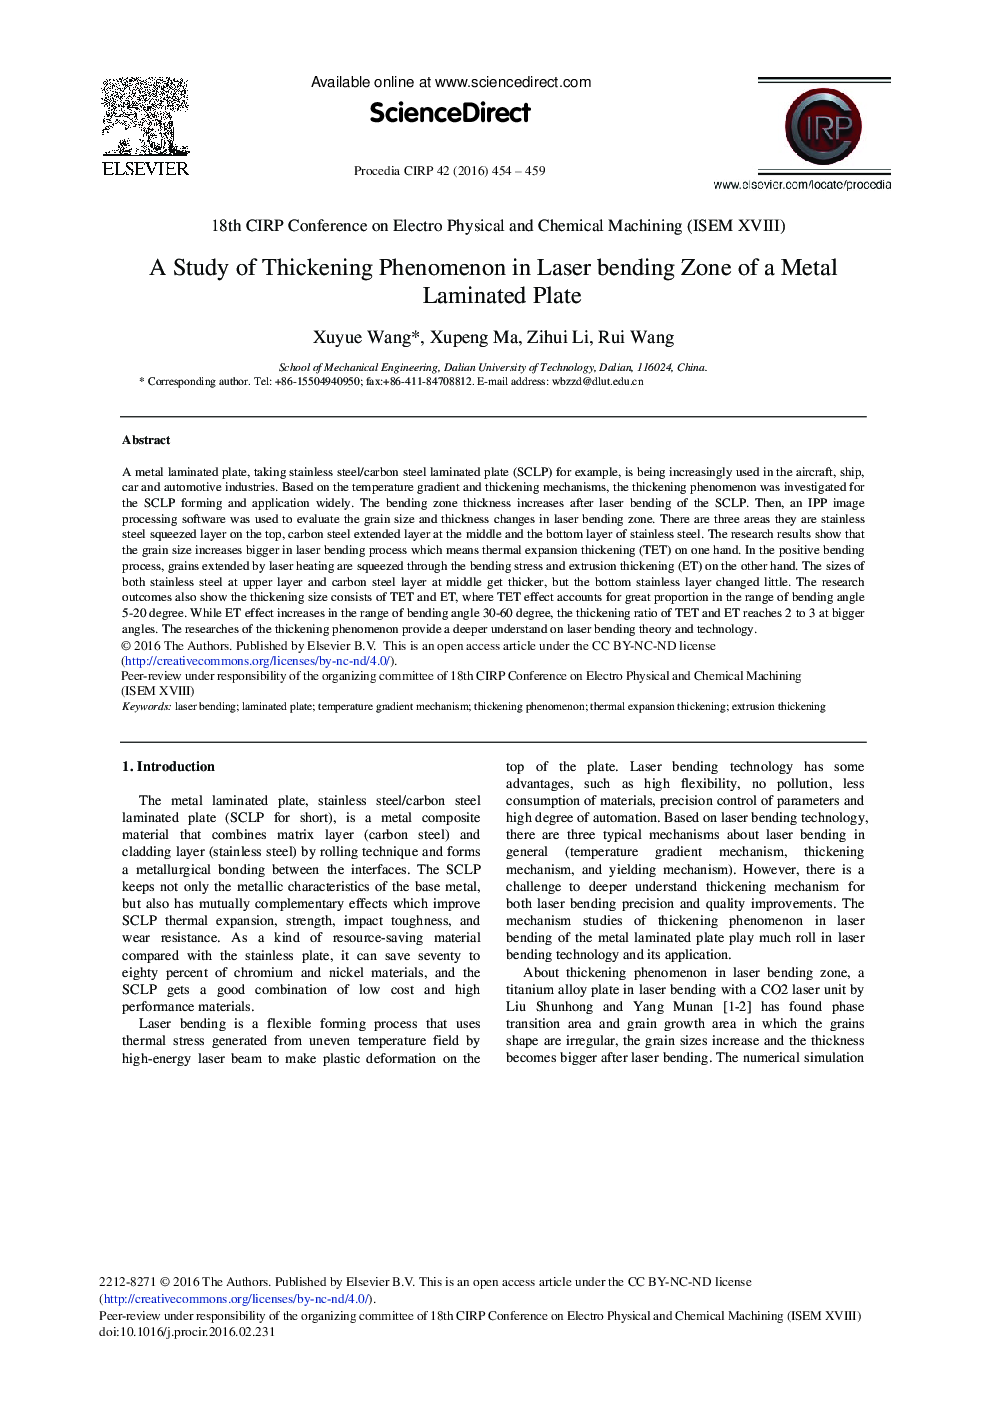 A Study of Thickening Phenomenon in Laser Bending Zone of a Metal Laminated Plate 